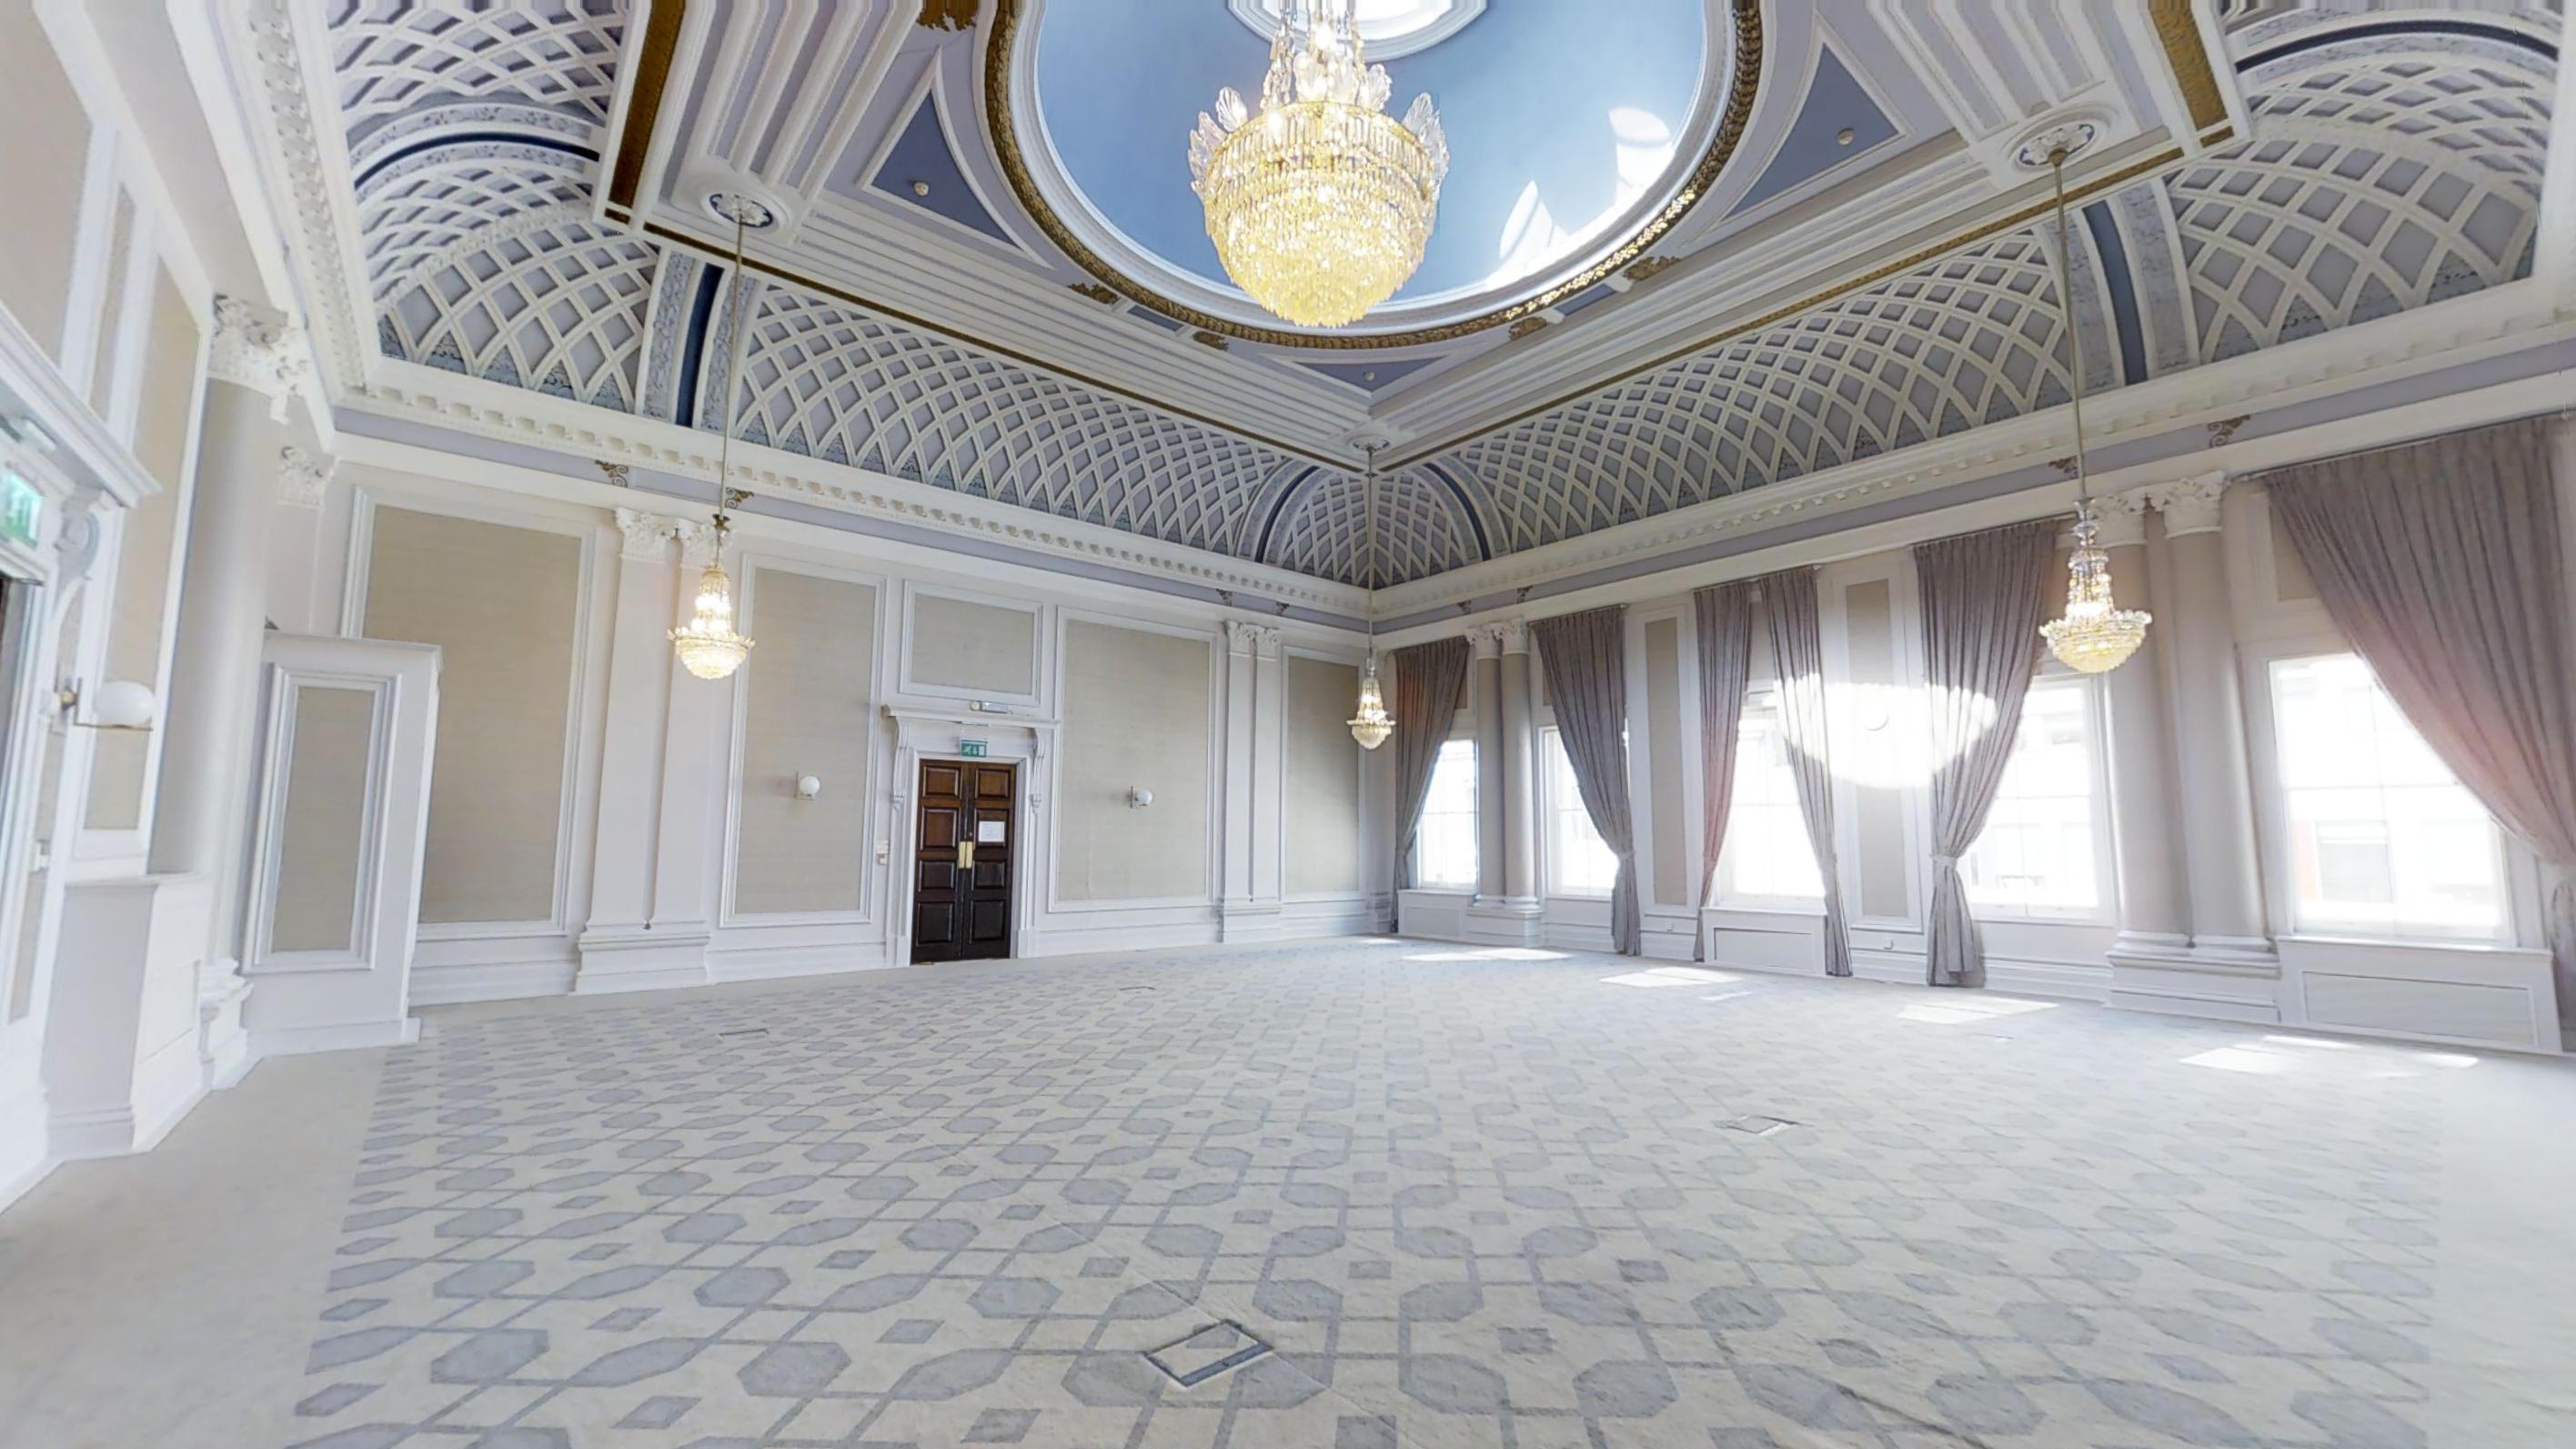 Cornwall & Crown, De Vere - Grand Connaught Rooms photo #2